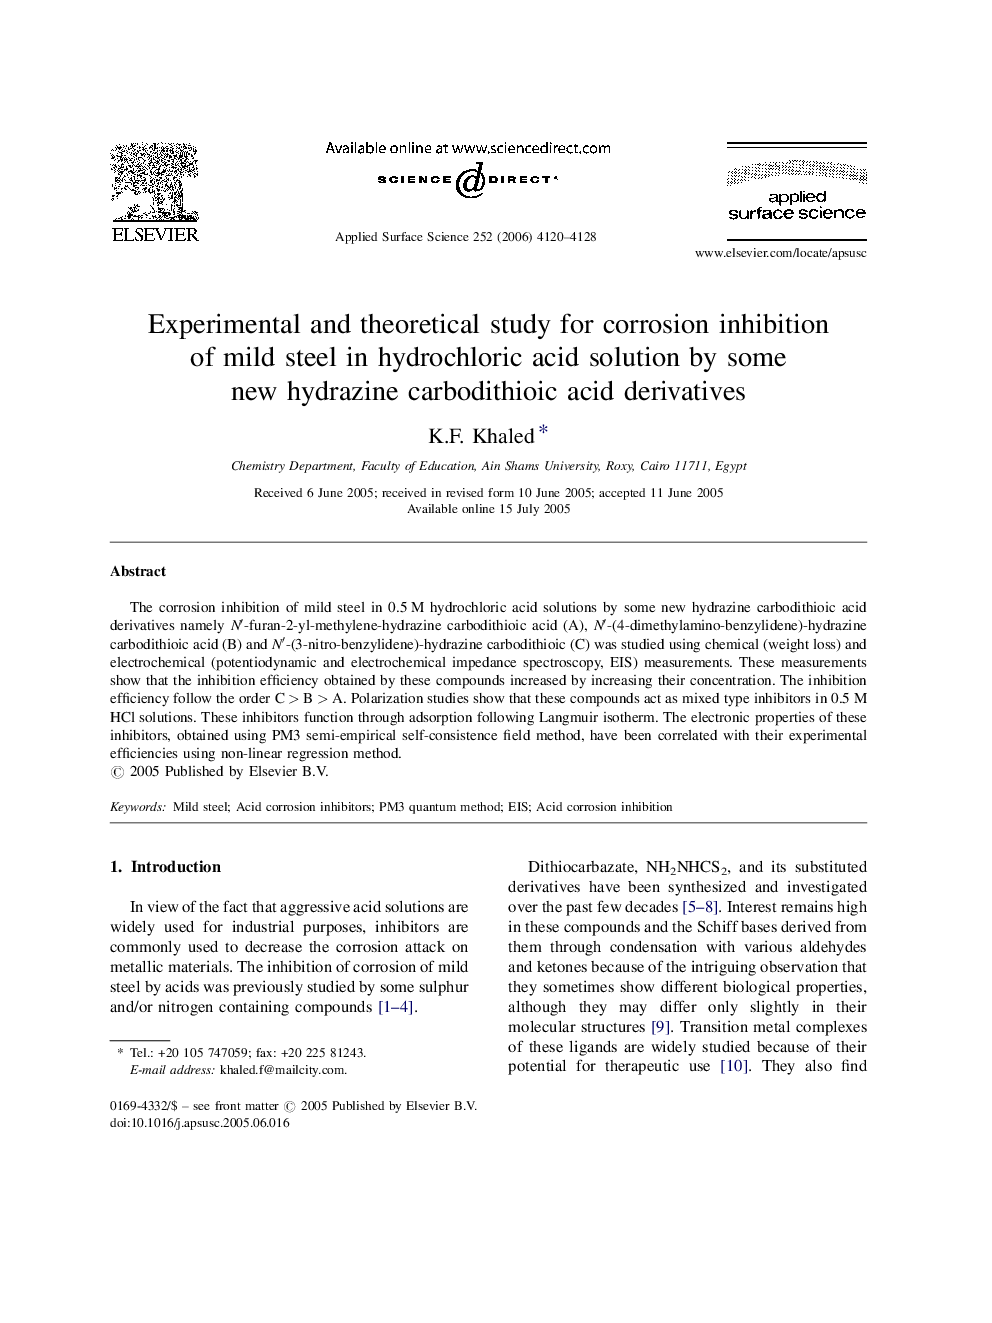 Experimental and theoretical study for corrosion inhibition of mild steel in hydrochloric acid solution by some new hydrazine carbodithioic acid derivatives